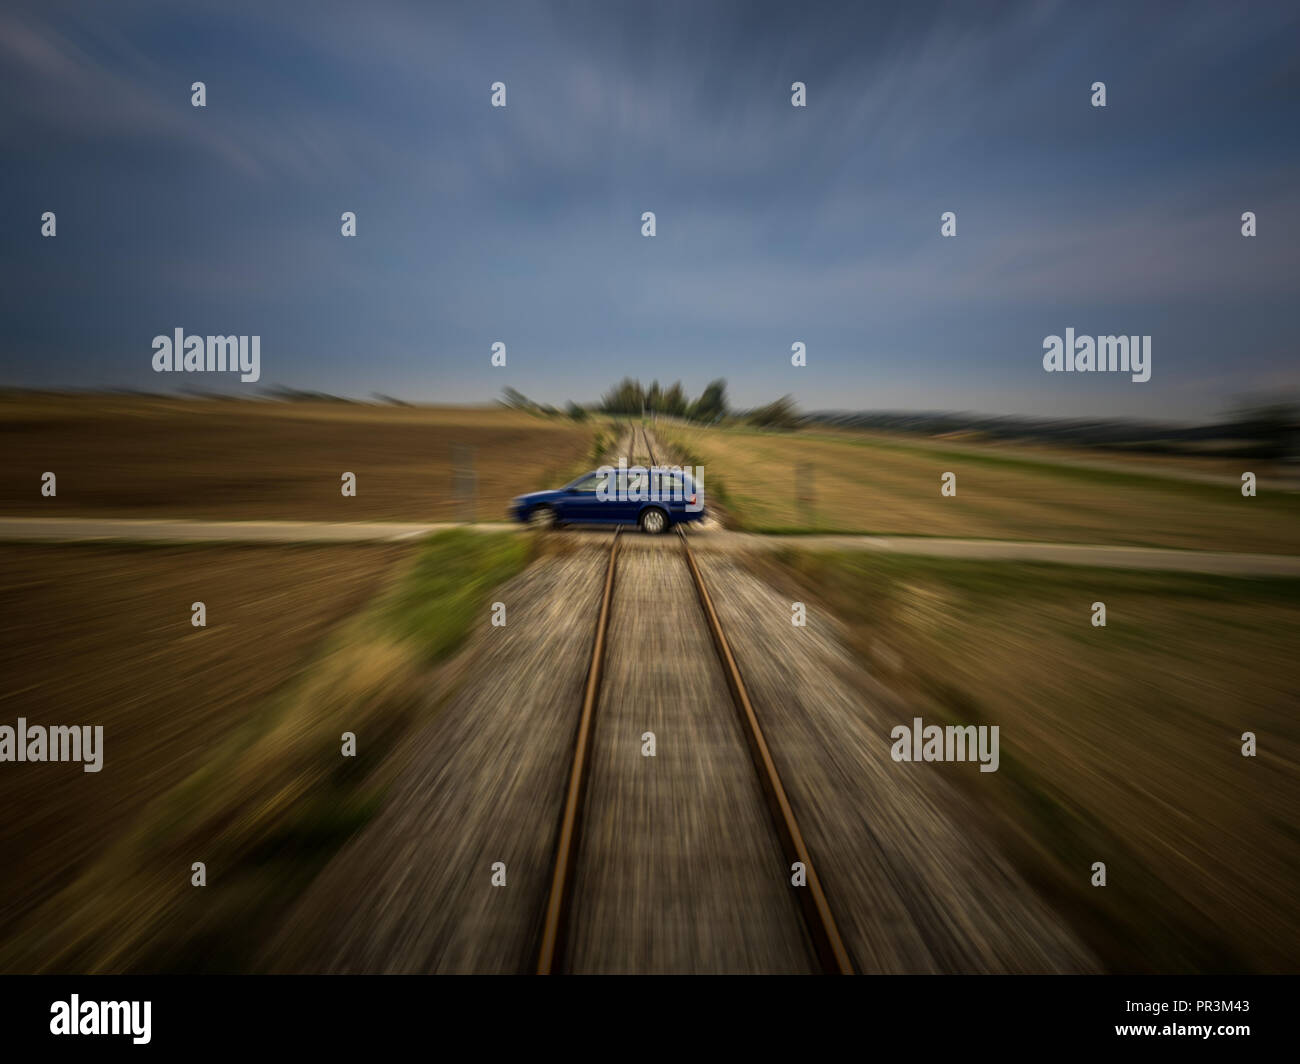 Train perspective of a car passing a railroad crossing with medium motion blur Stock Photo